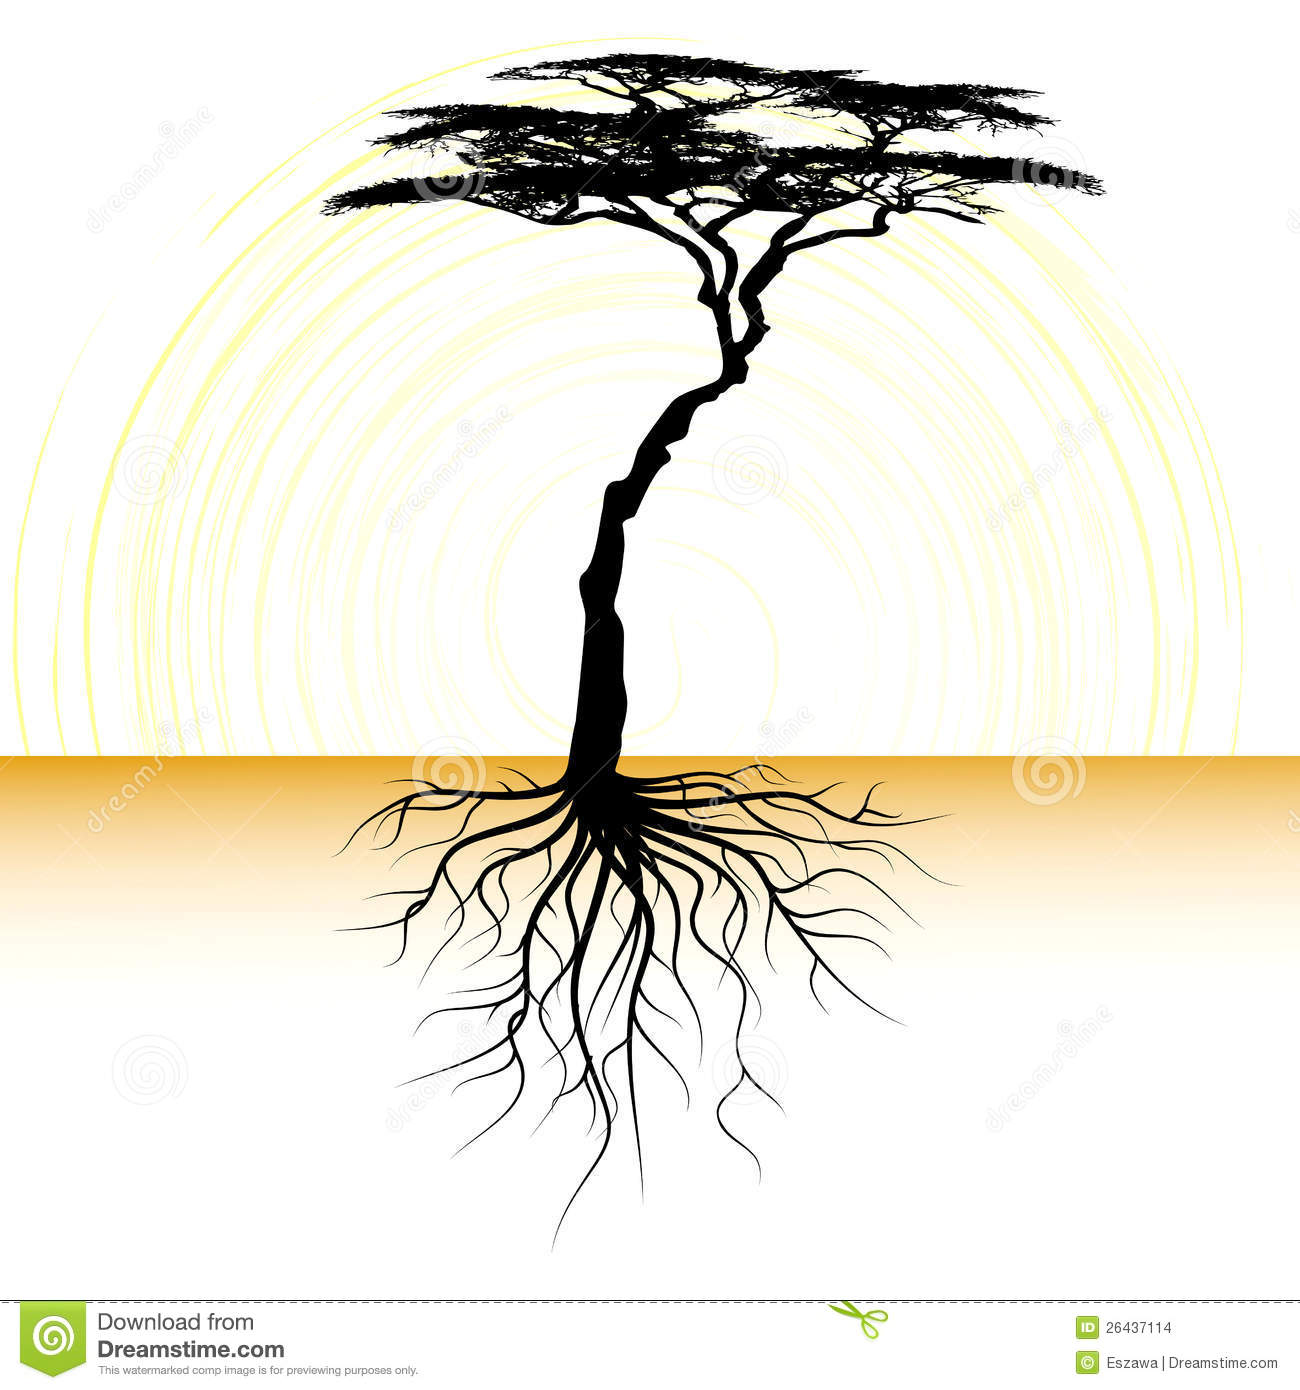 Acacia tree with a root